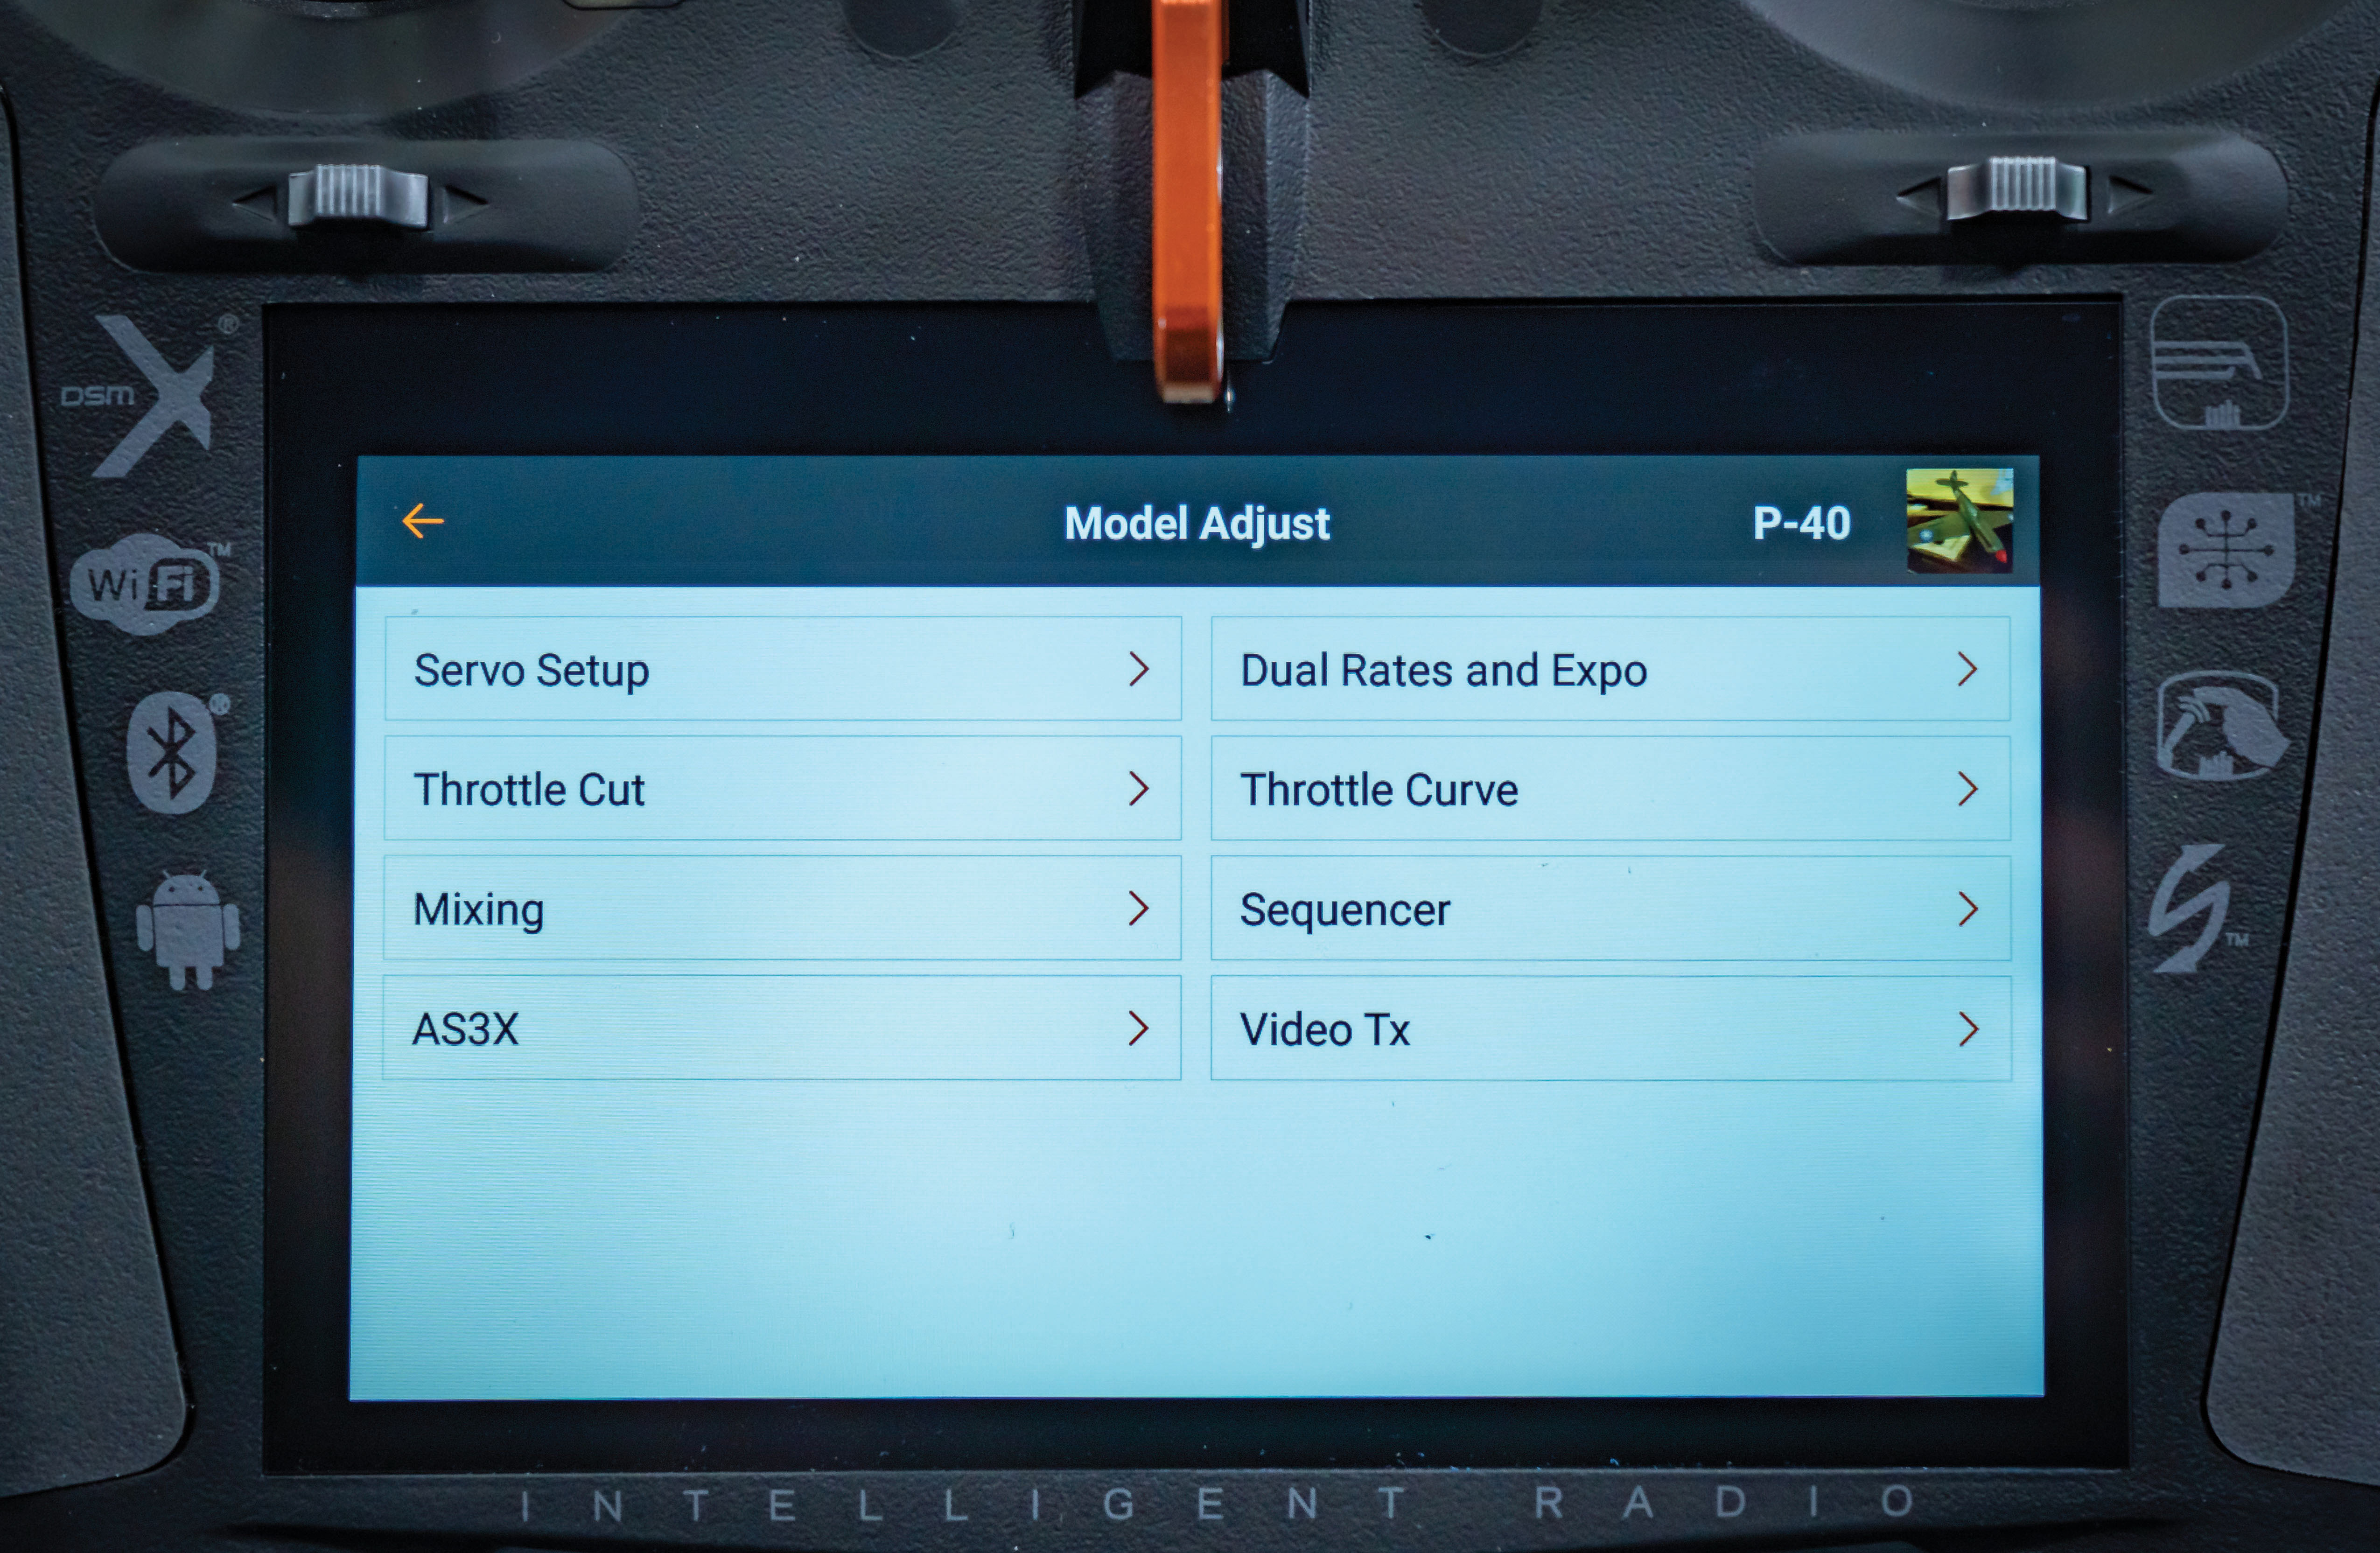 the model adjust menu contains features and adjustments that are used to finalize the settings